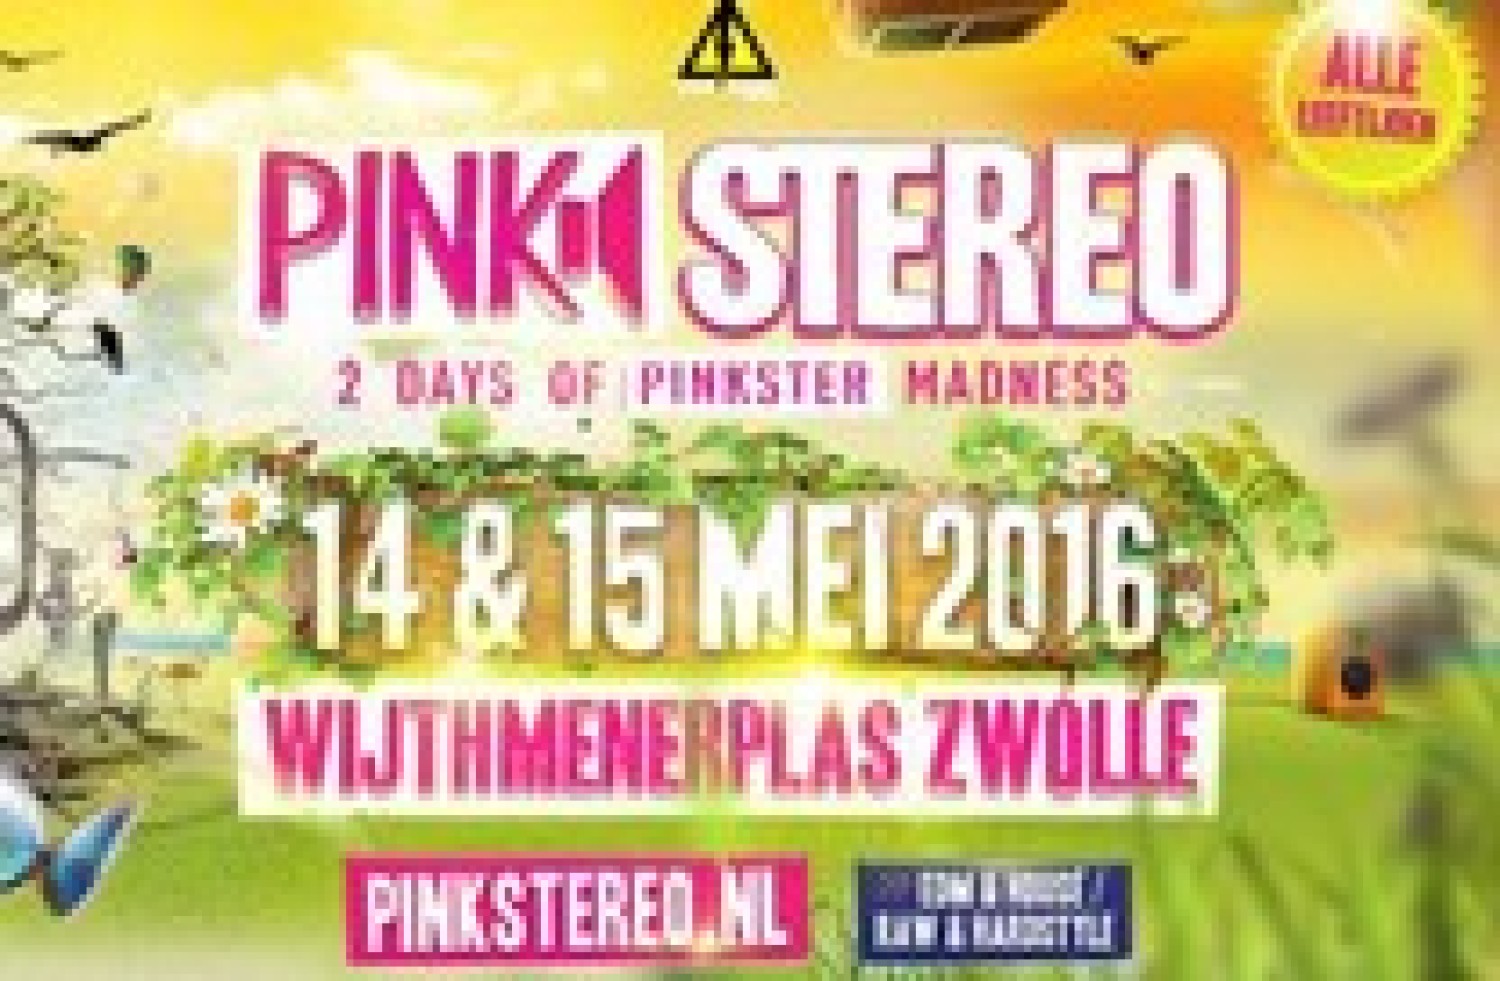 Party nieuws: Volledige line-up Pink Stereo, tickets slechts 10 euro!